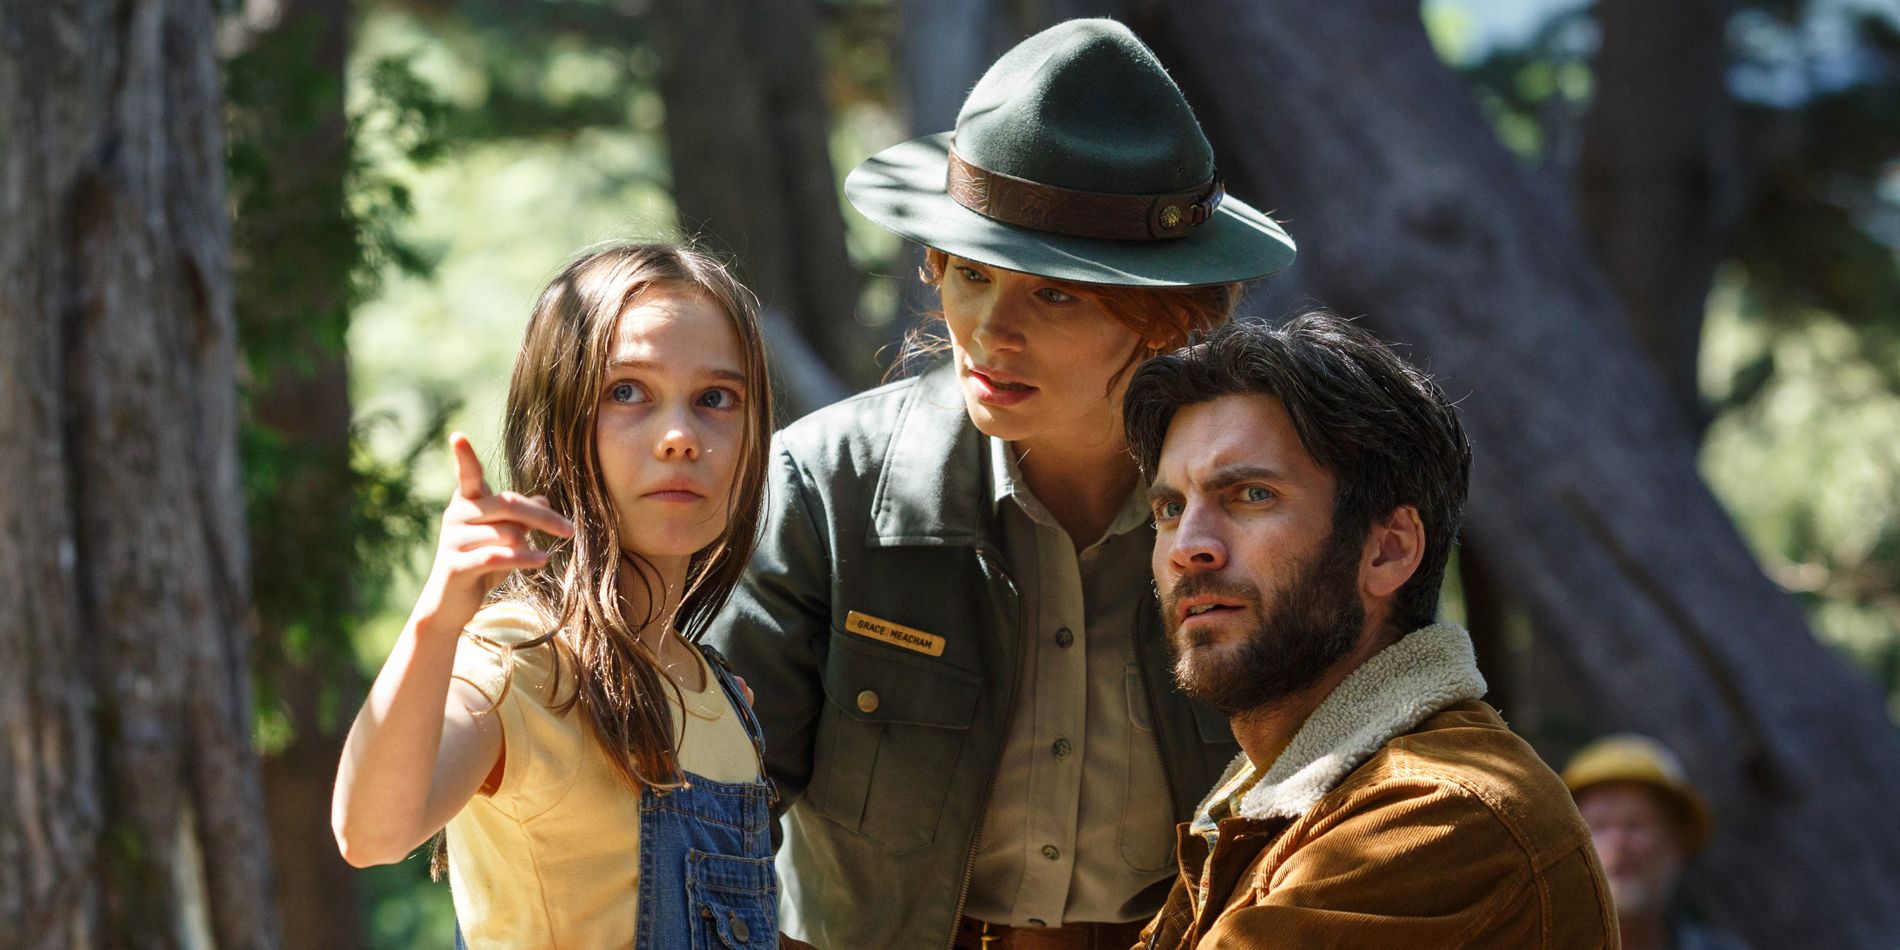 Oona Laurence Bryce Dallas Howard and Wes Bentley in Petes Dragon